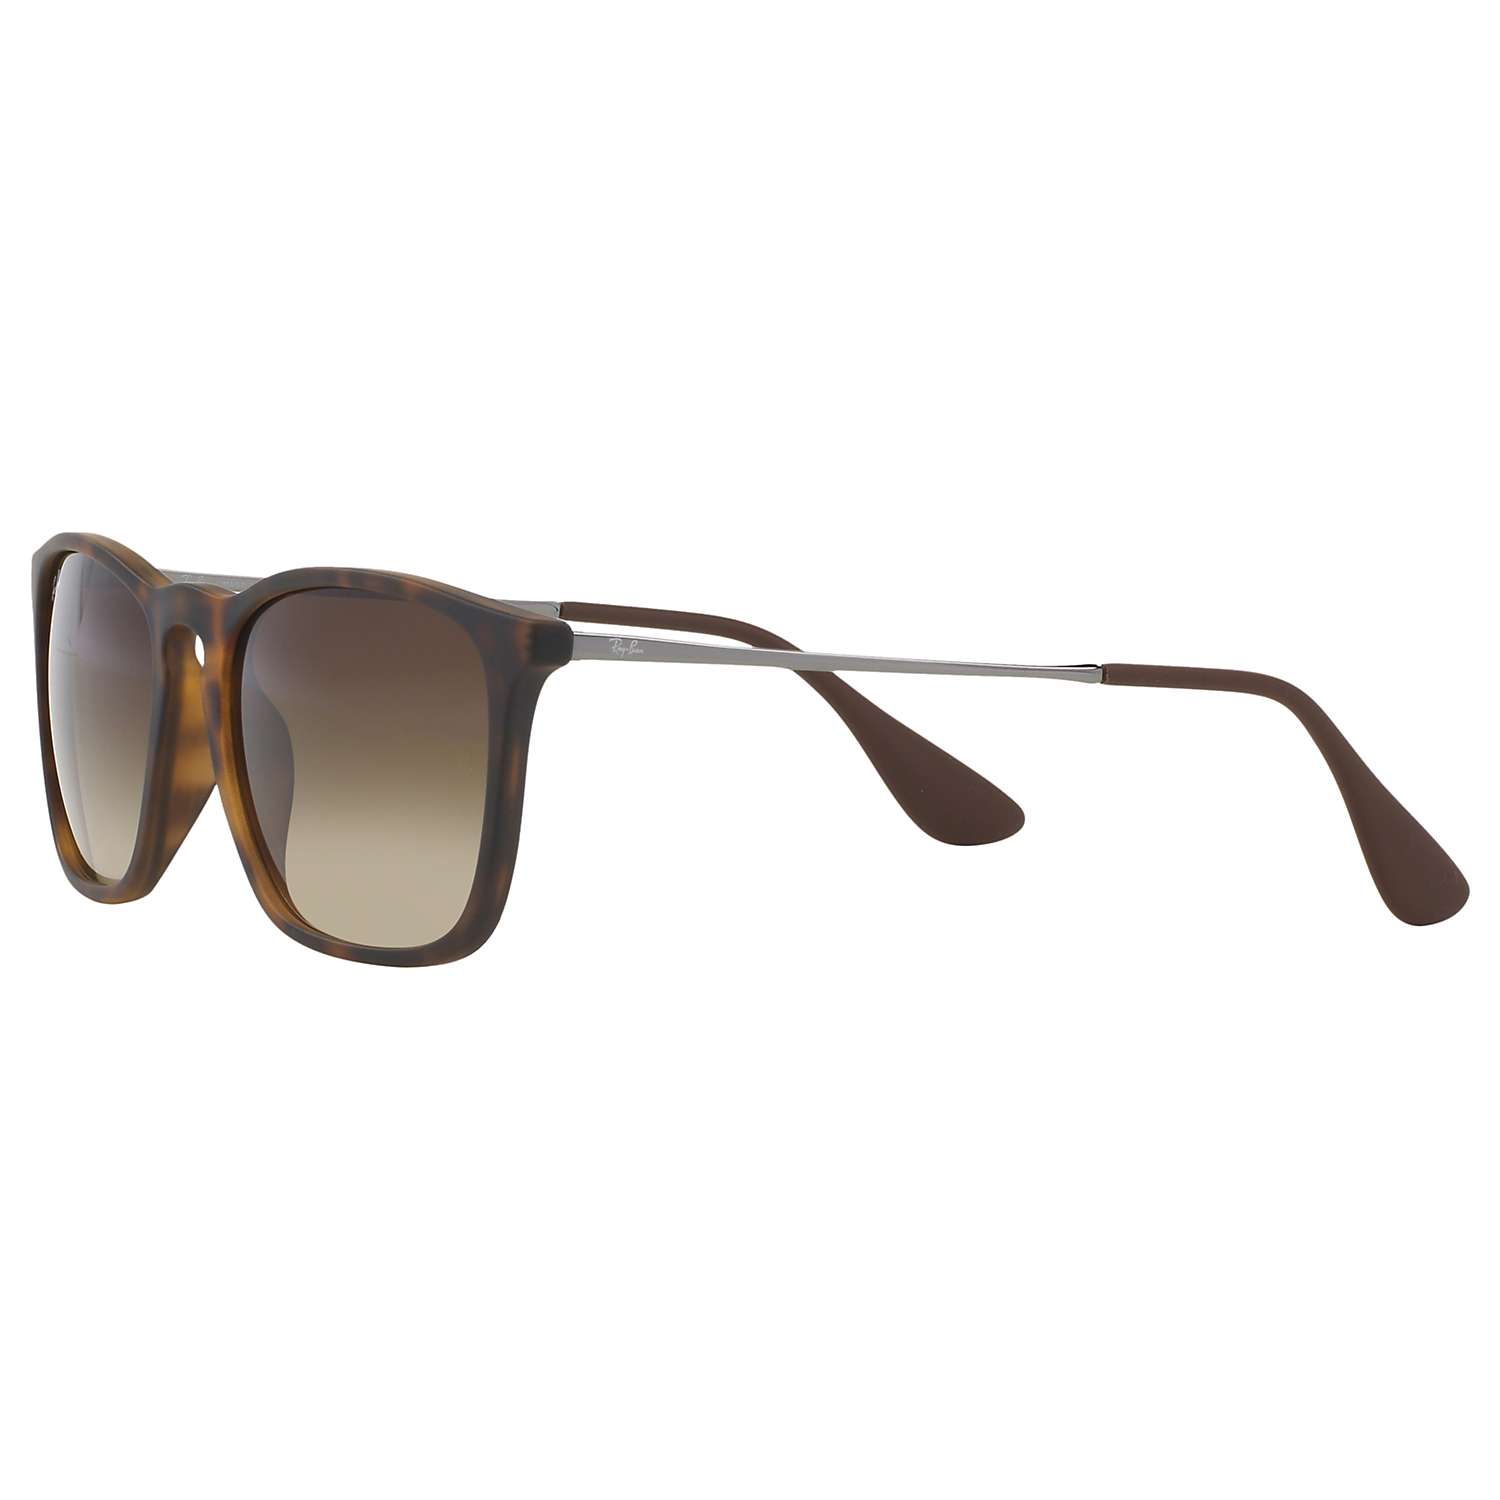 Buy Ray-Ban RB4187 Chris Square Sunglasses Online at johnlewis.com